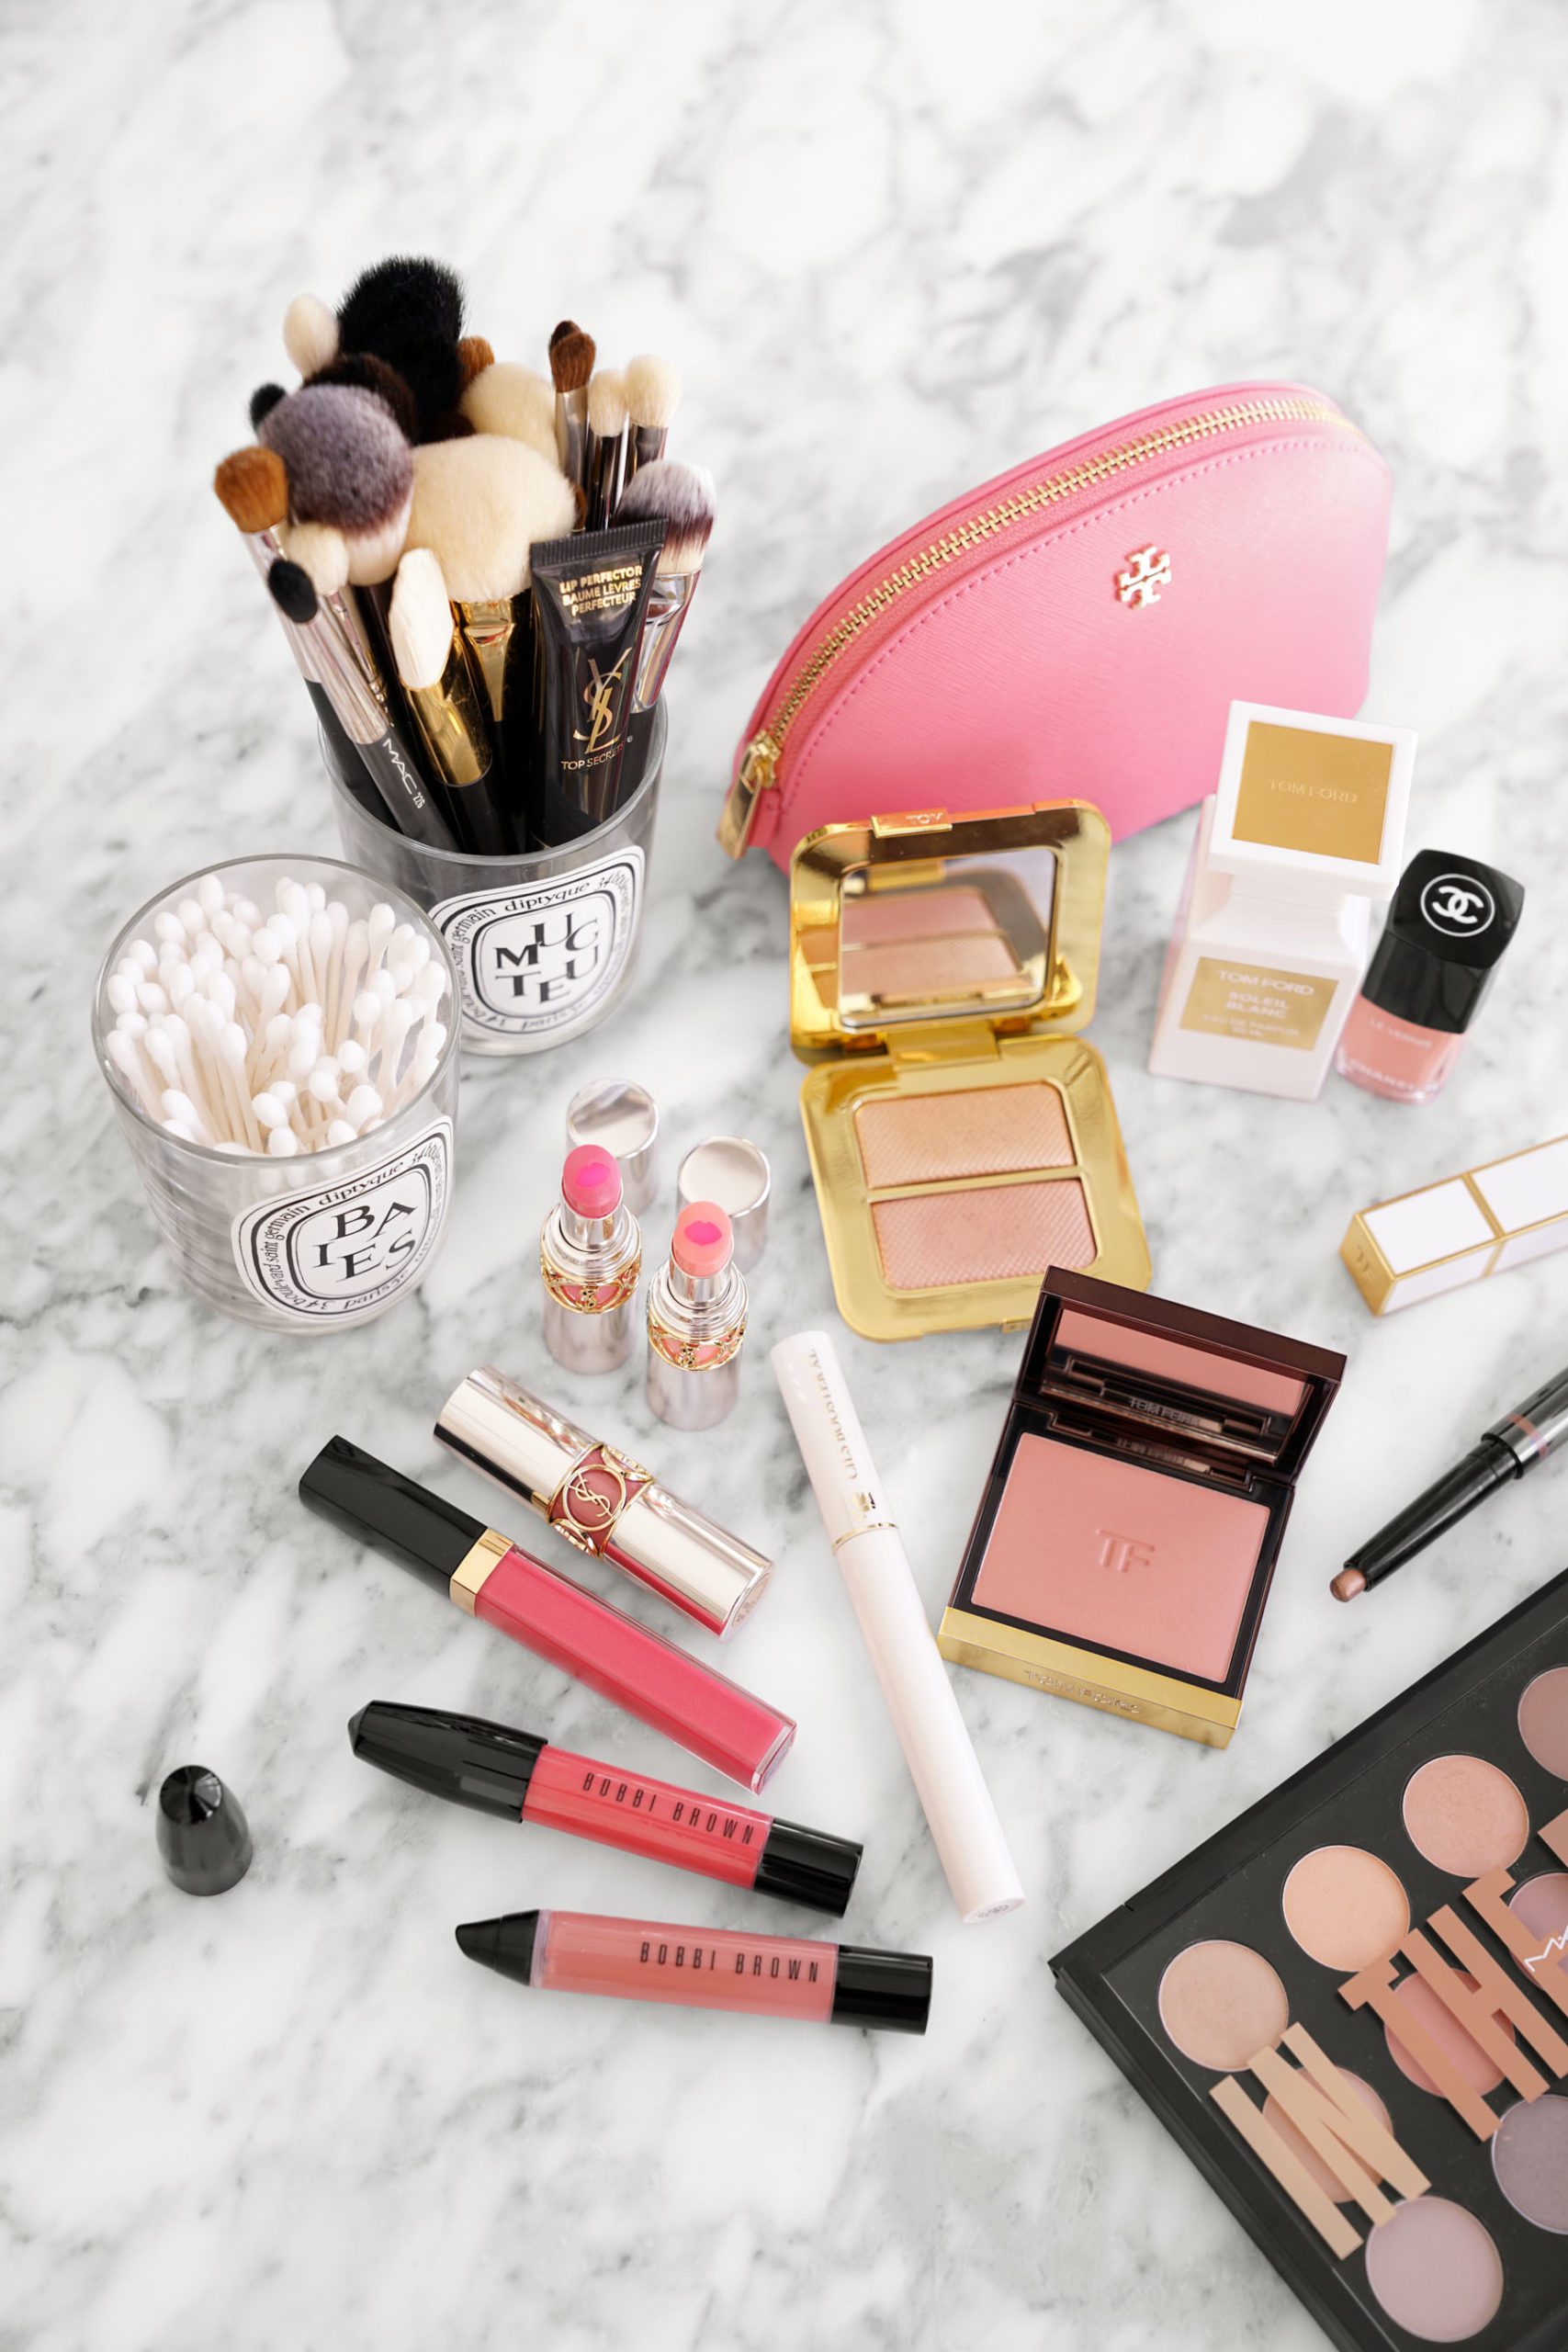 Makeup Bag Archives - The Beauty Look Book